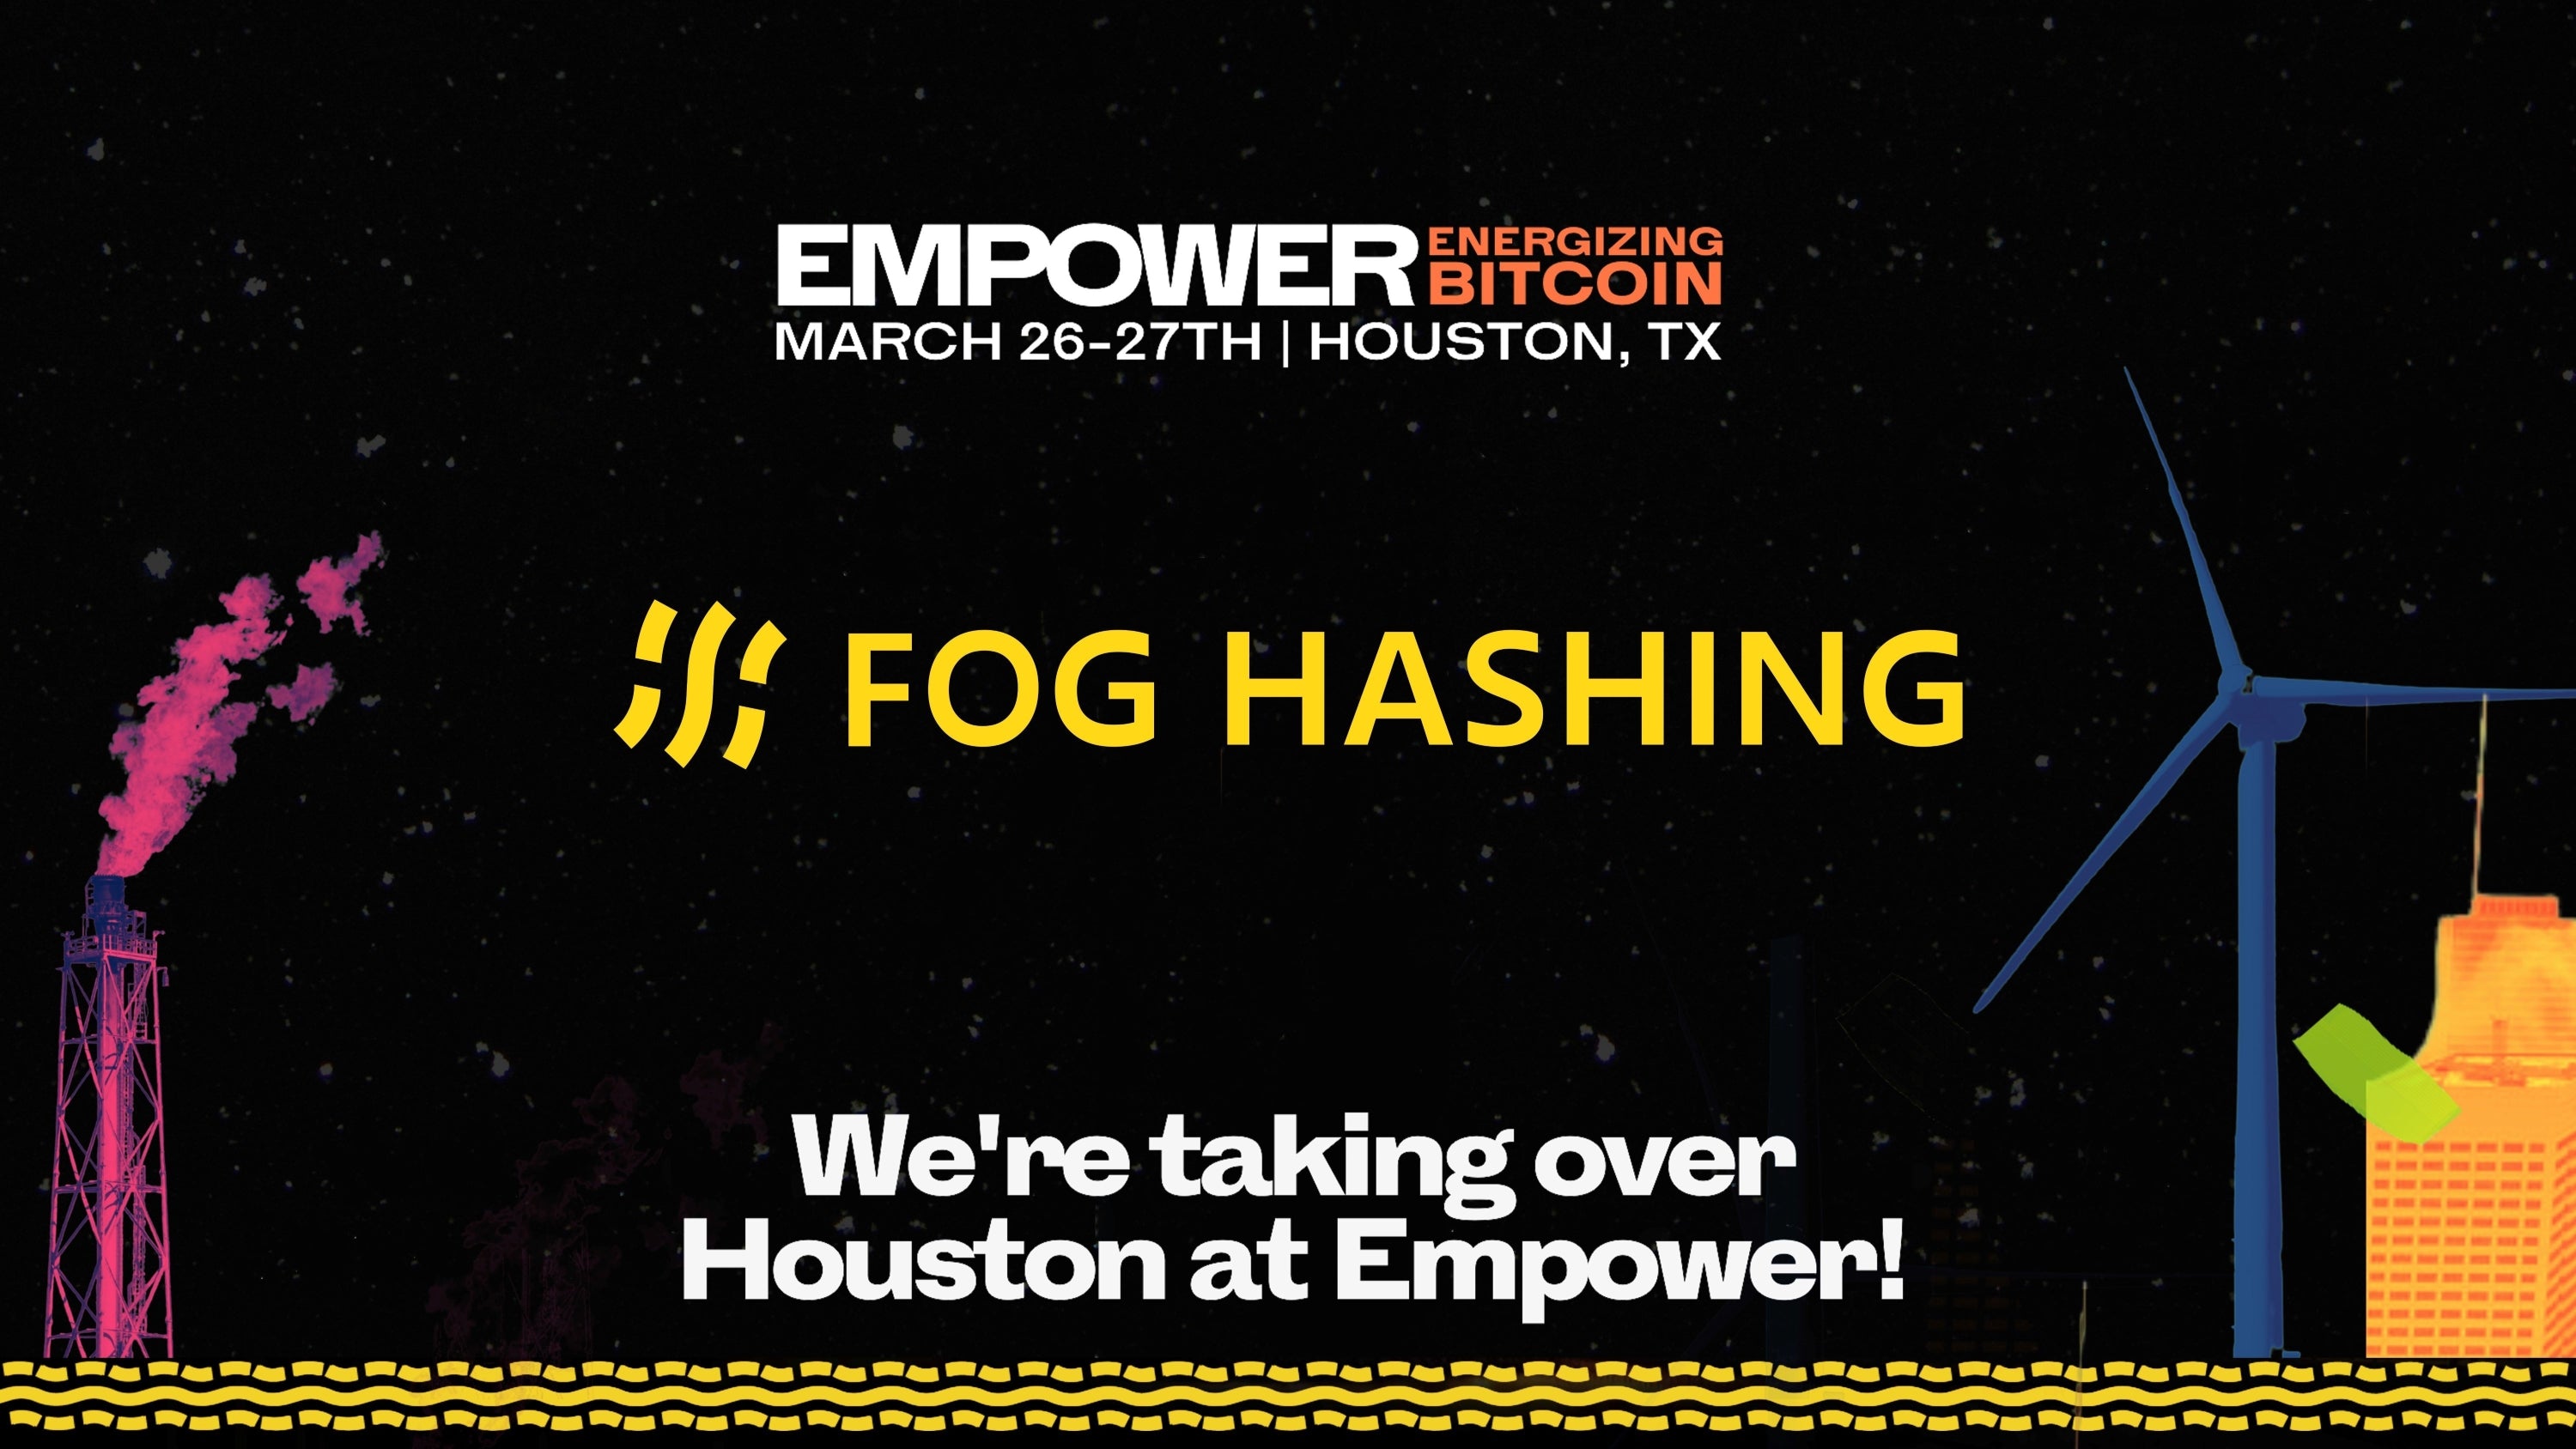 Exploring Bitcoin mining in an environmental-friendly and economical-efficient way, FogHashing 's solutions for solar-powered liquid cooling mining debut on EMpower.